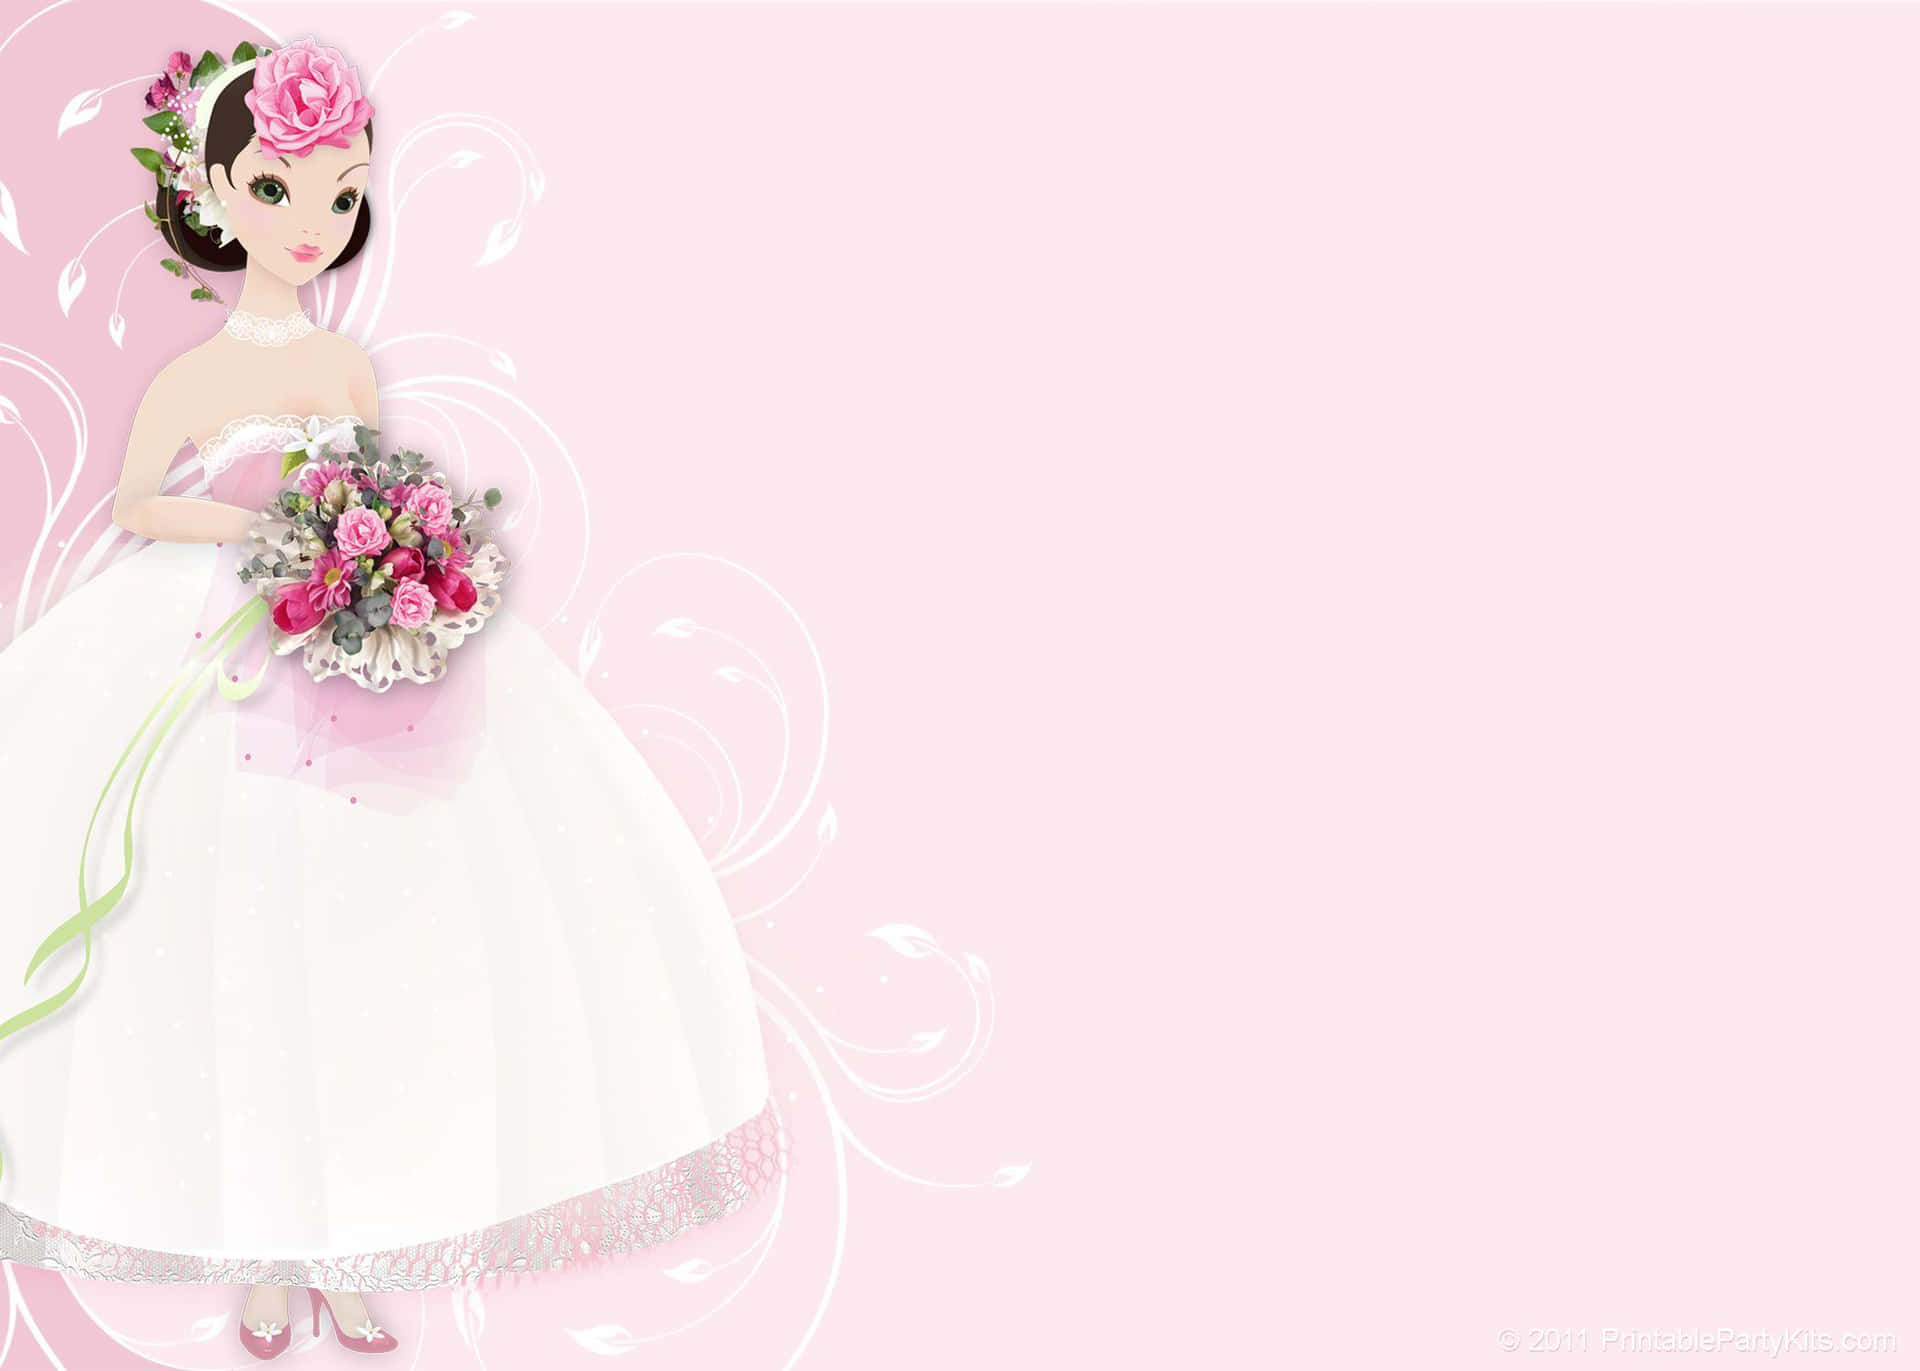 A Cartoon Bride In A Pink Dress With Flowers